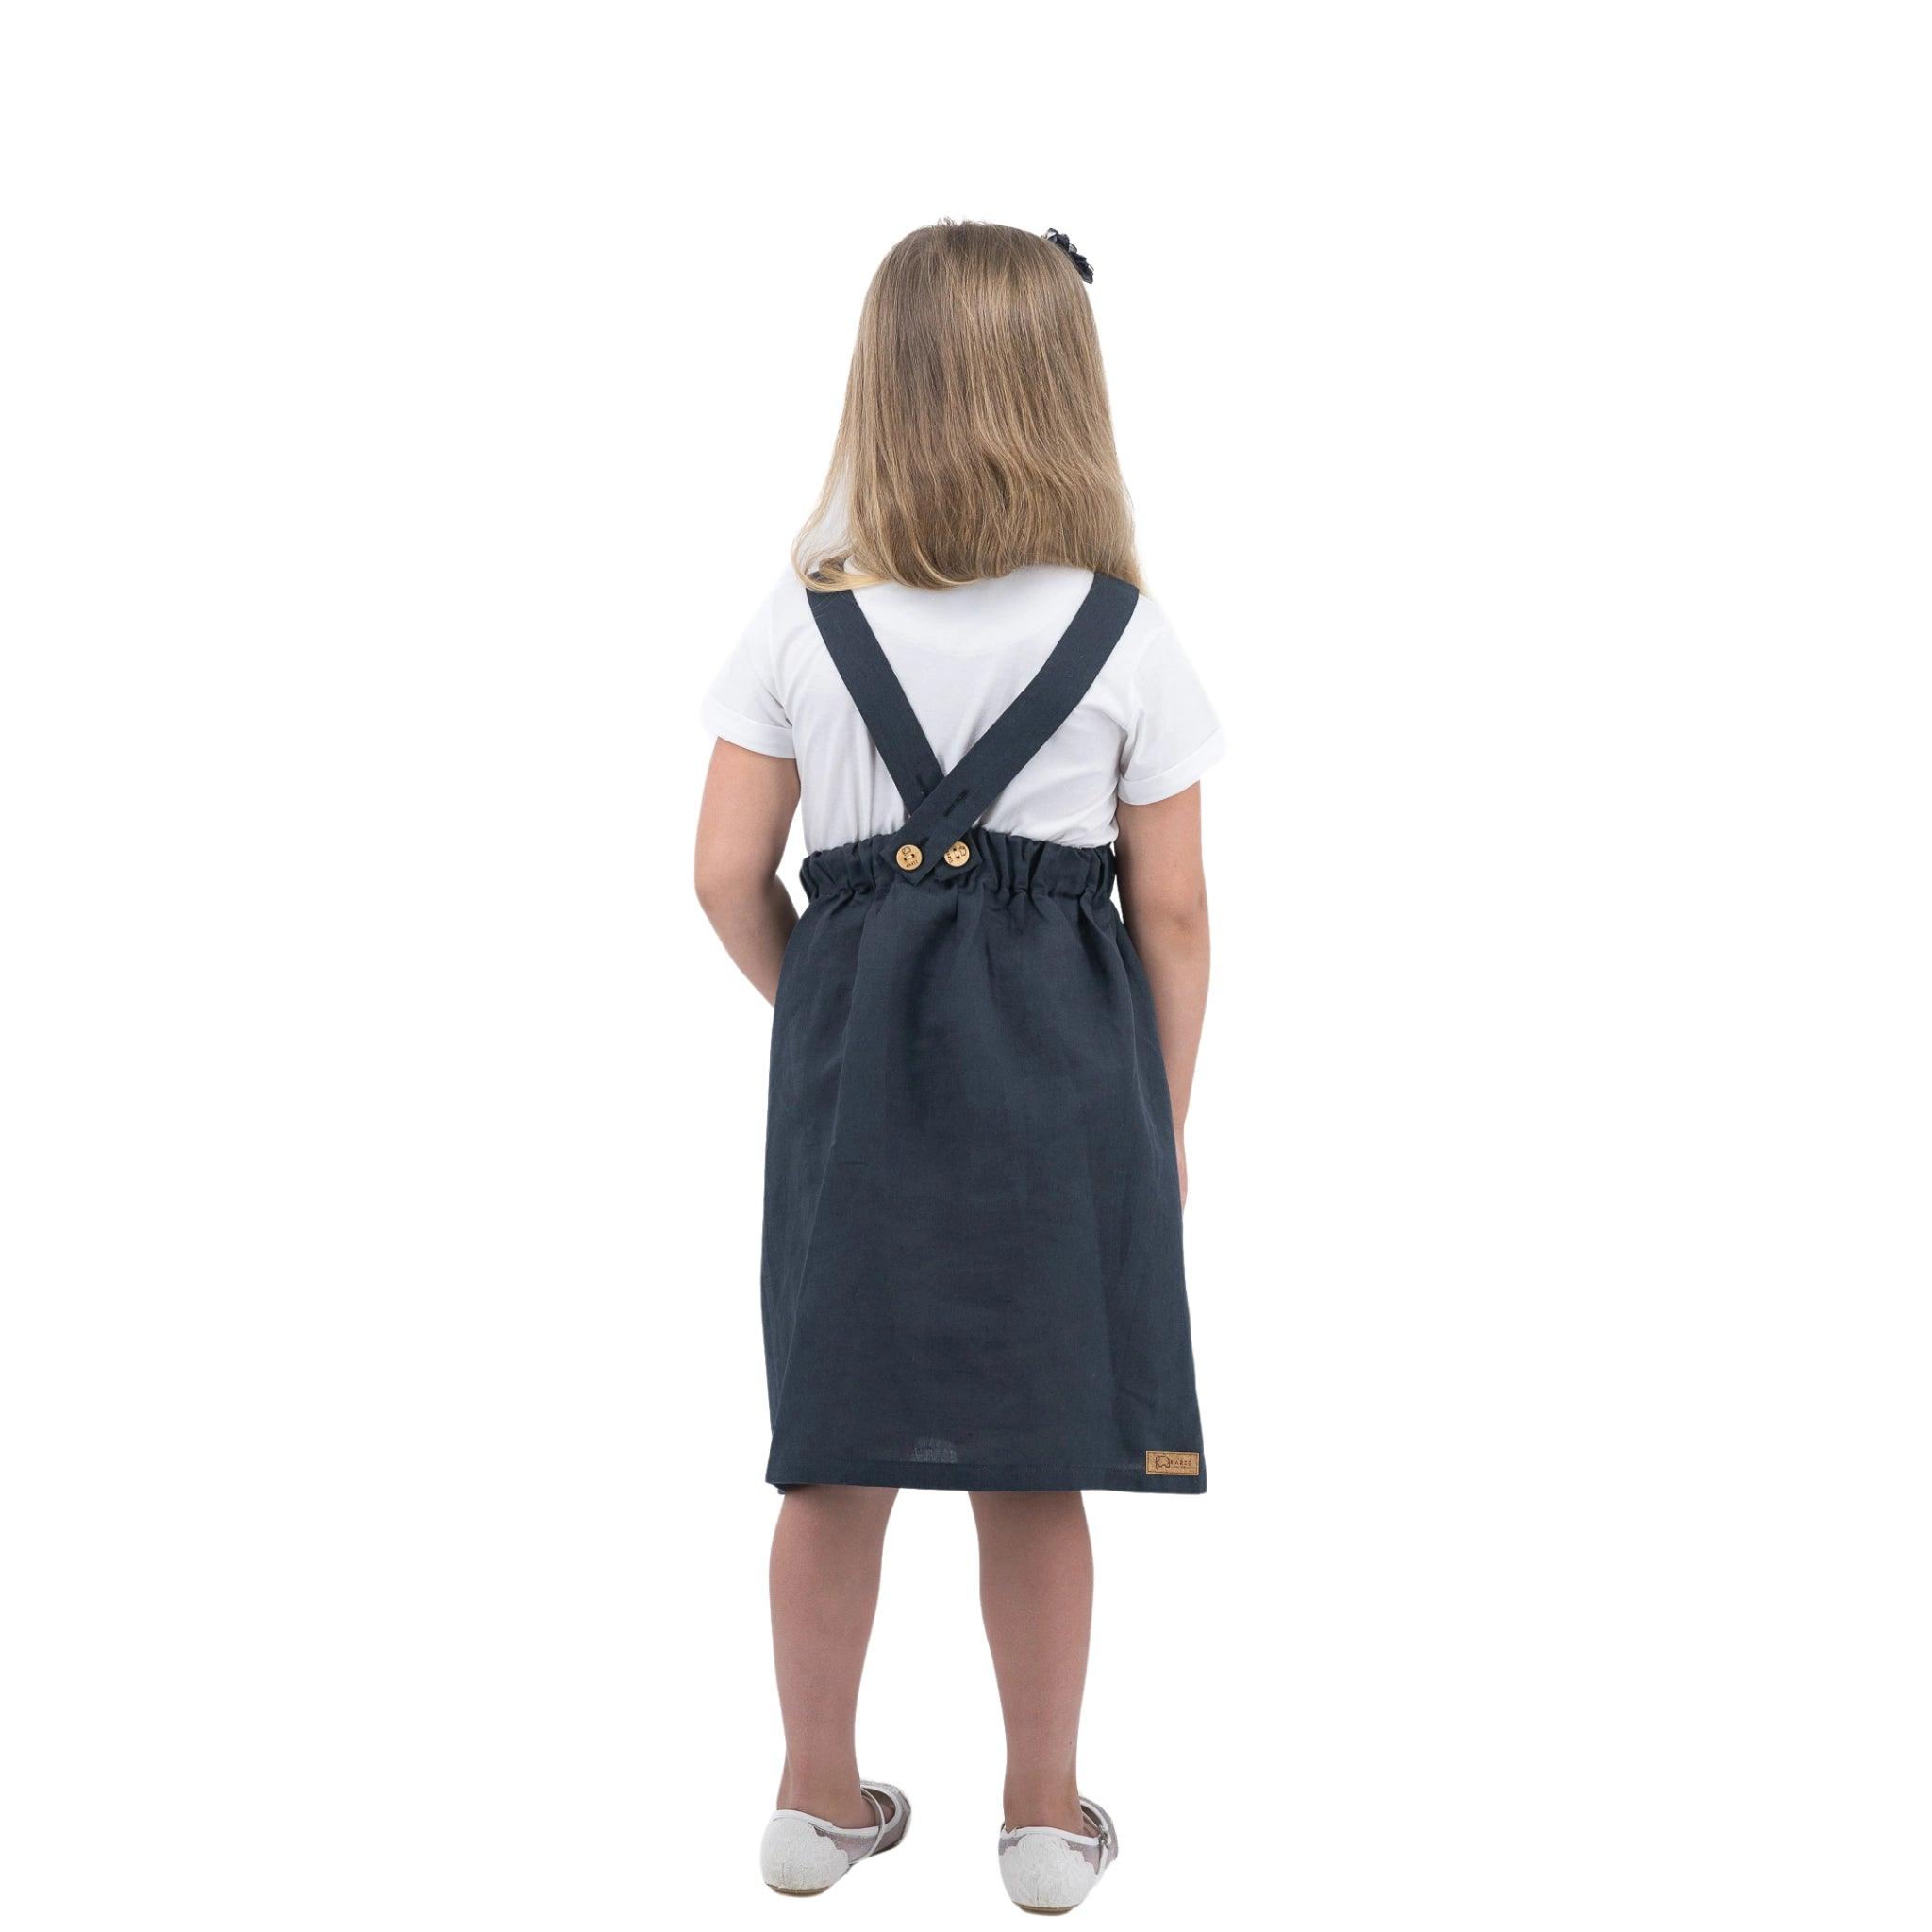 Young girl seen from behind wearing a white t-shirt and a Karee Ebony Black Linen Pinafore for Girls with suspenders, standing against a white background.